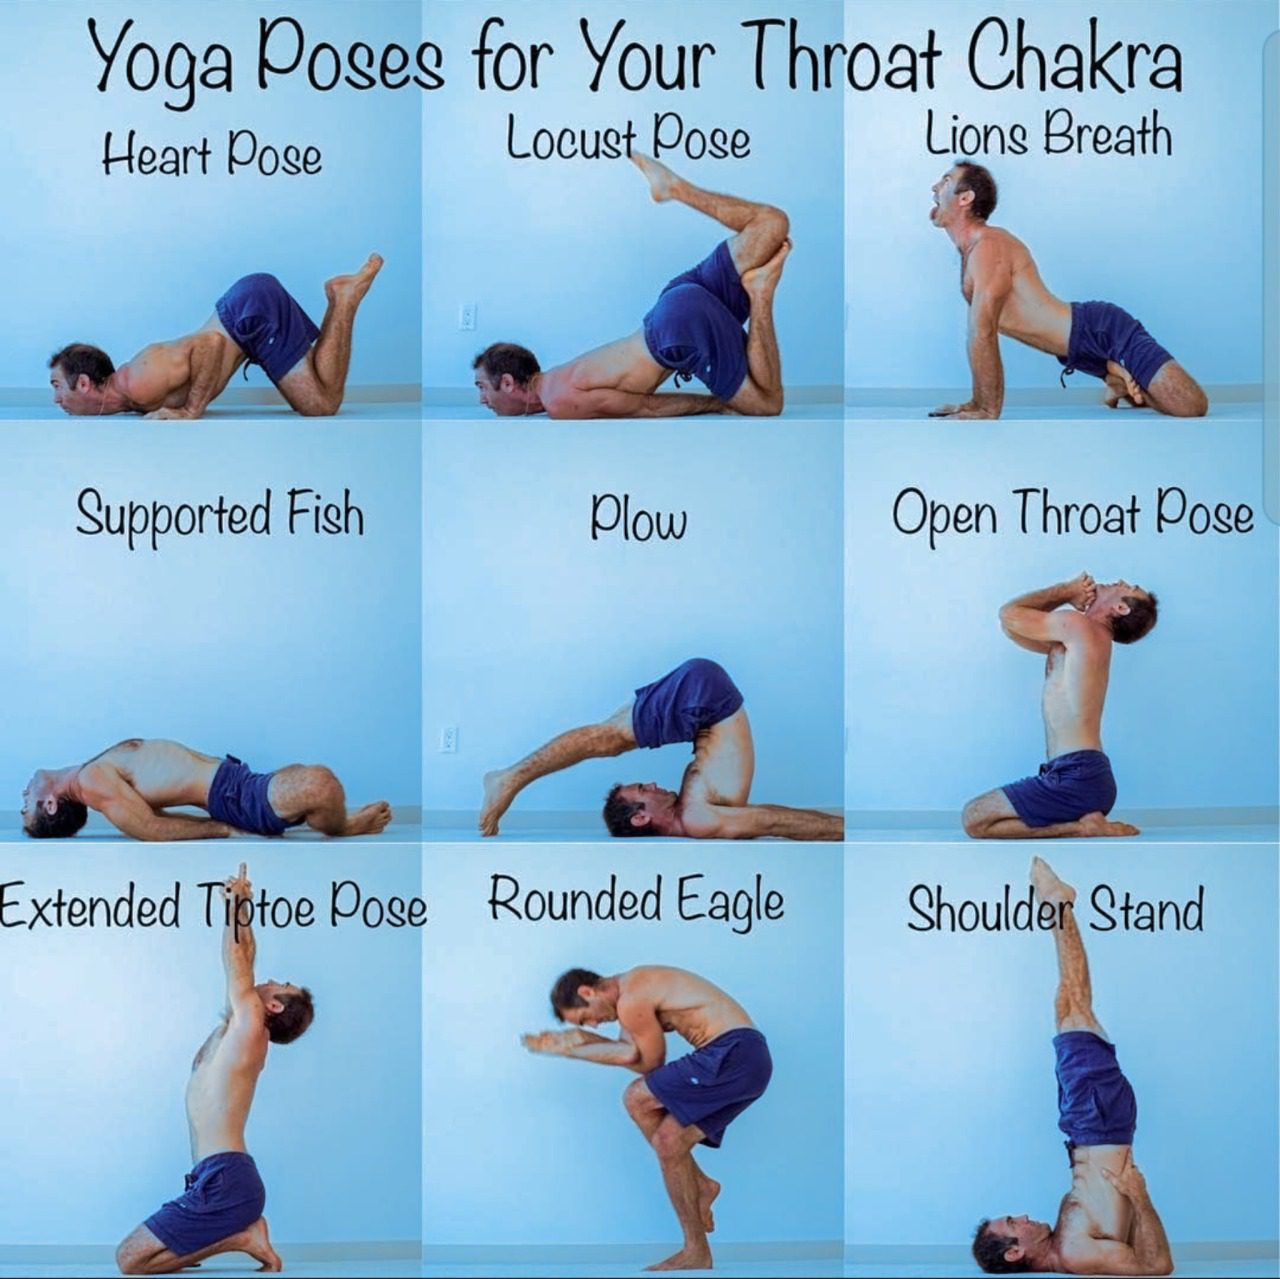 A man doing all the poses of throat chakras